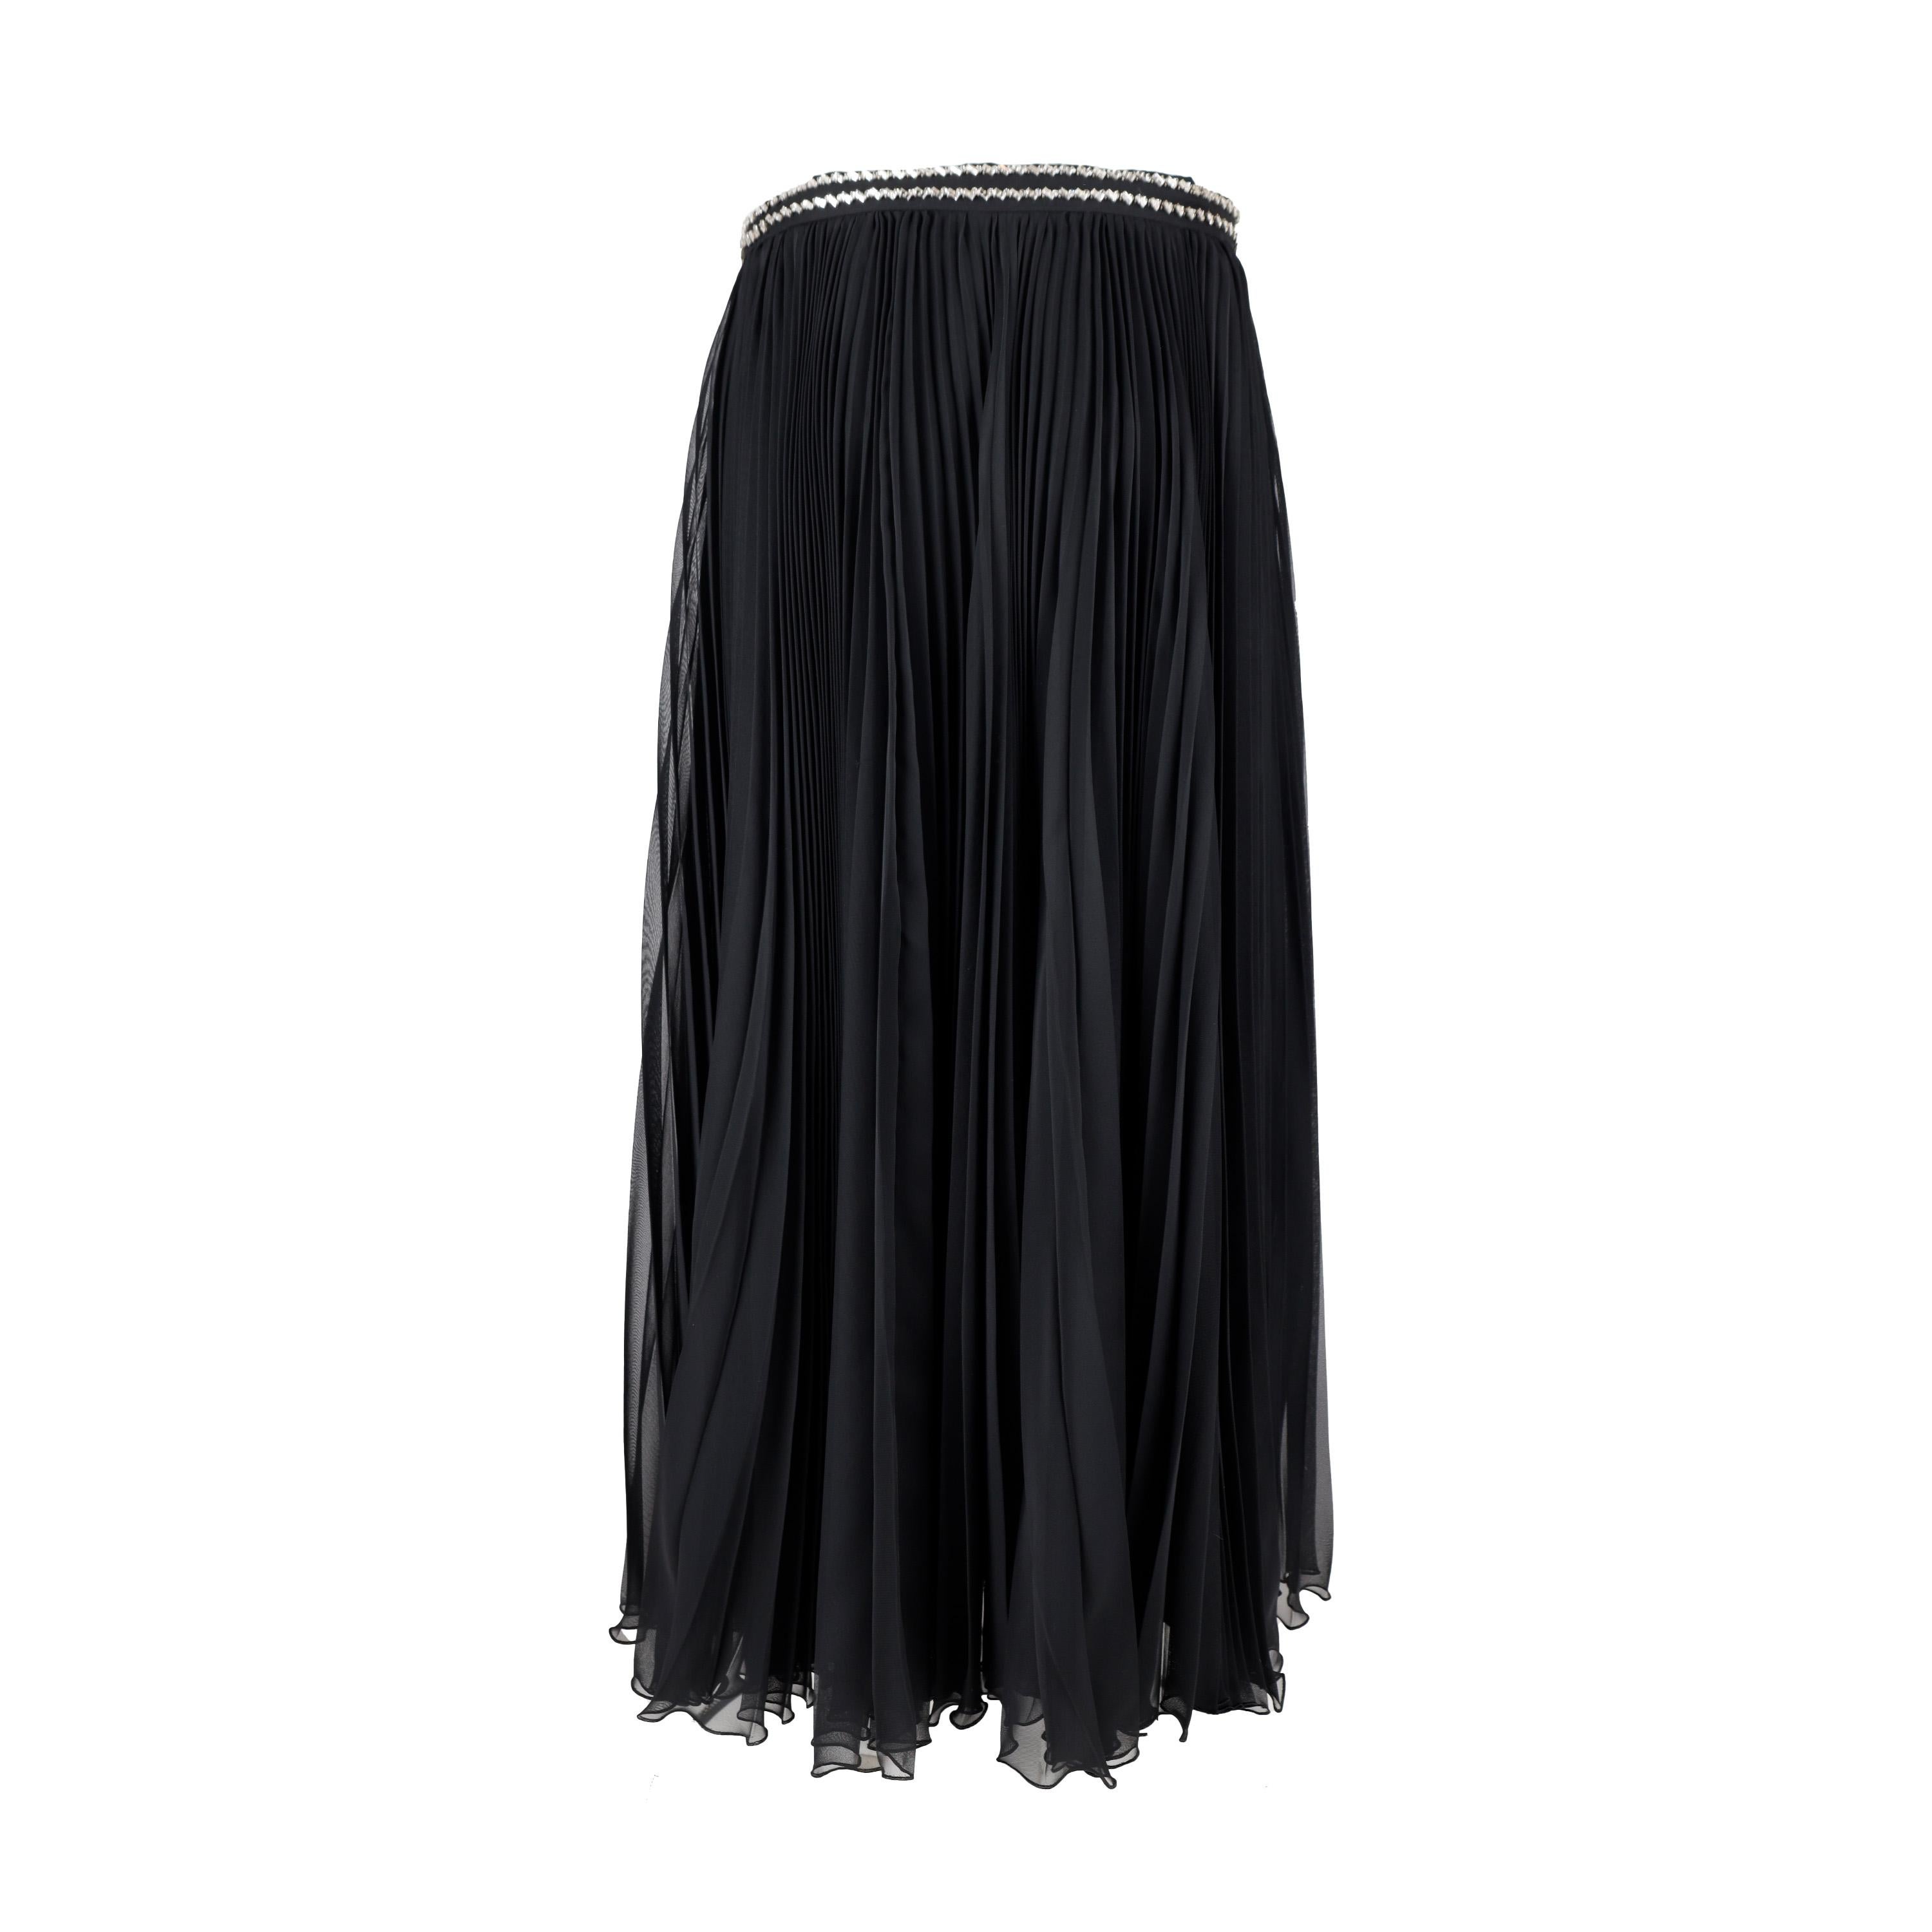 This Prada pleated skirt takes classic sophistication up a notch. Crafted in black fabric, it features two lines of delicate sparkling stones arranged at the waistband and sharp accordion pleats for a midi length finish. 

Remarks: There are some